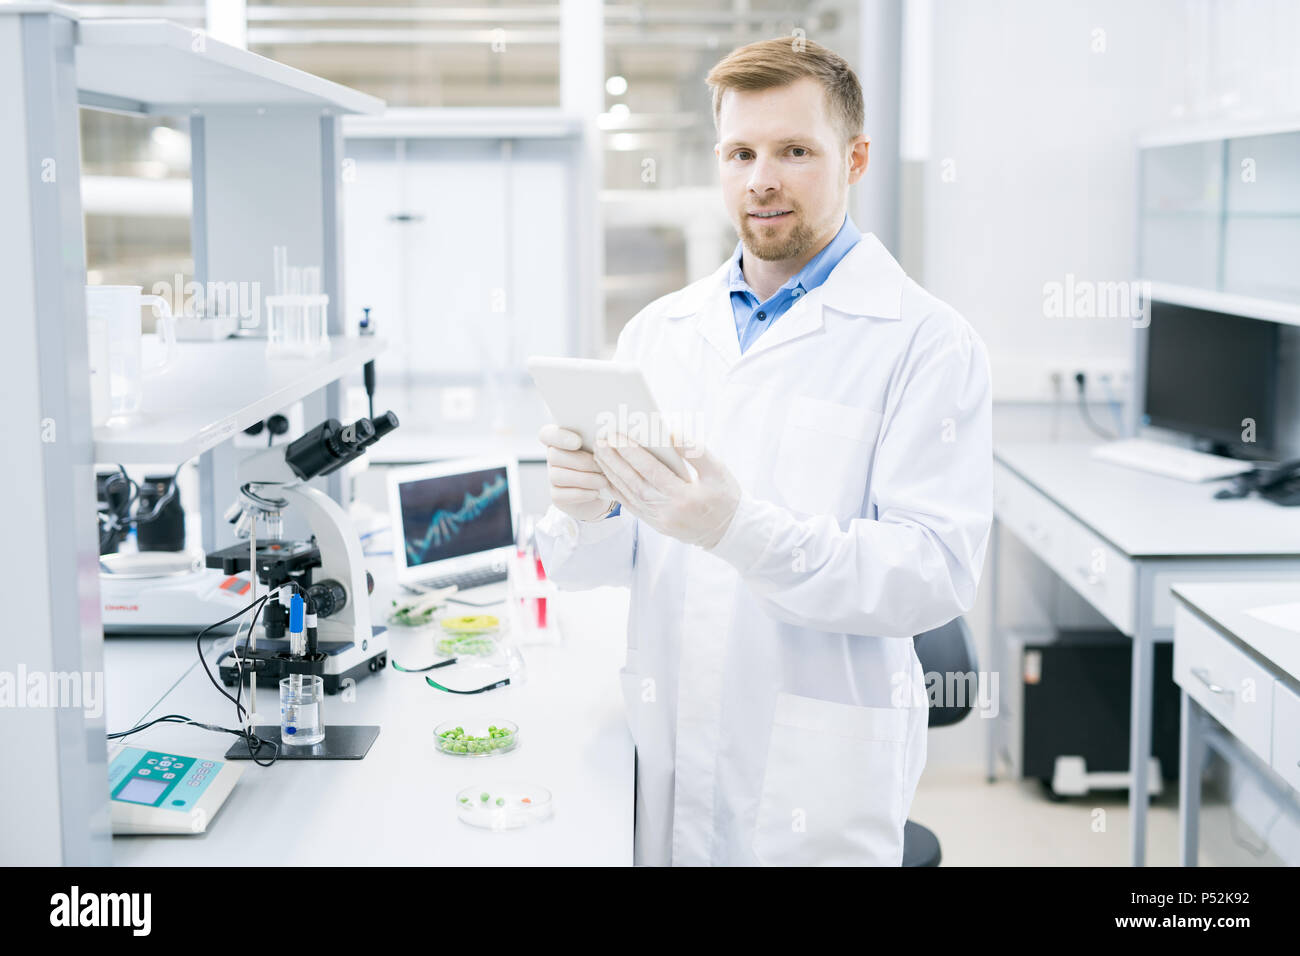 Scientist standing with tablet in laboratory Stock Photo